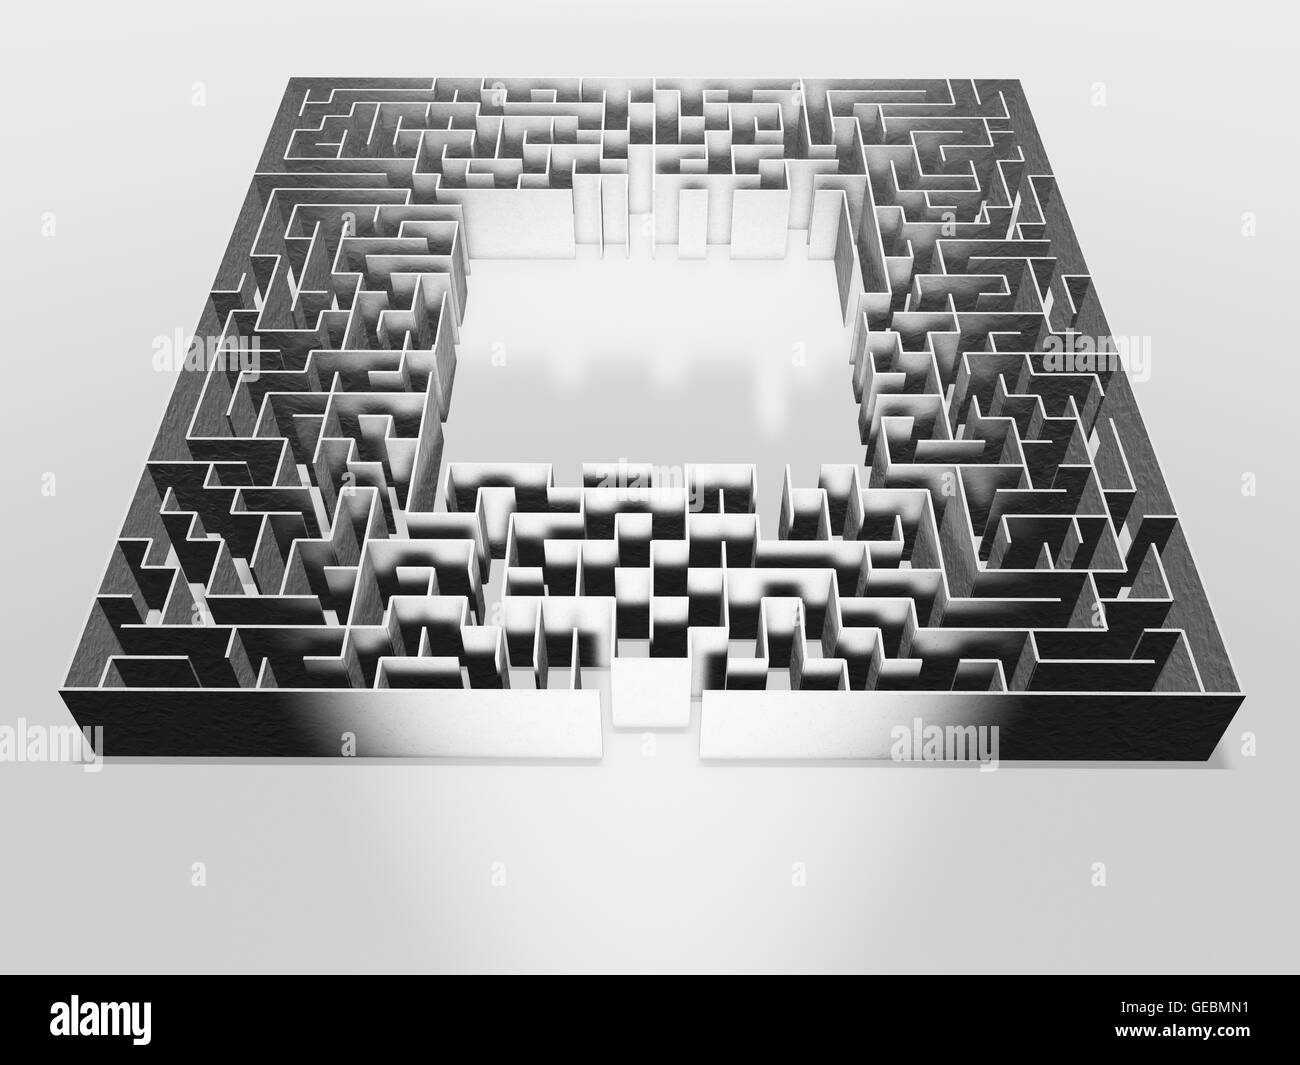 Maze on gray background. Concept for decision-making. 3d illustration. Stock Photo